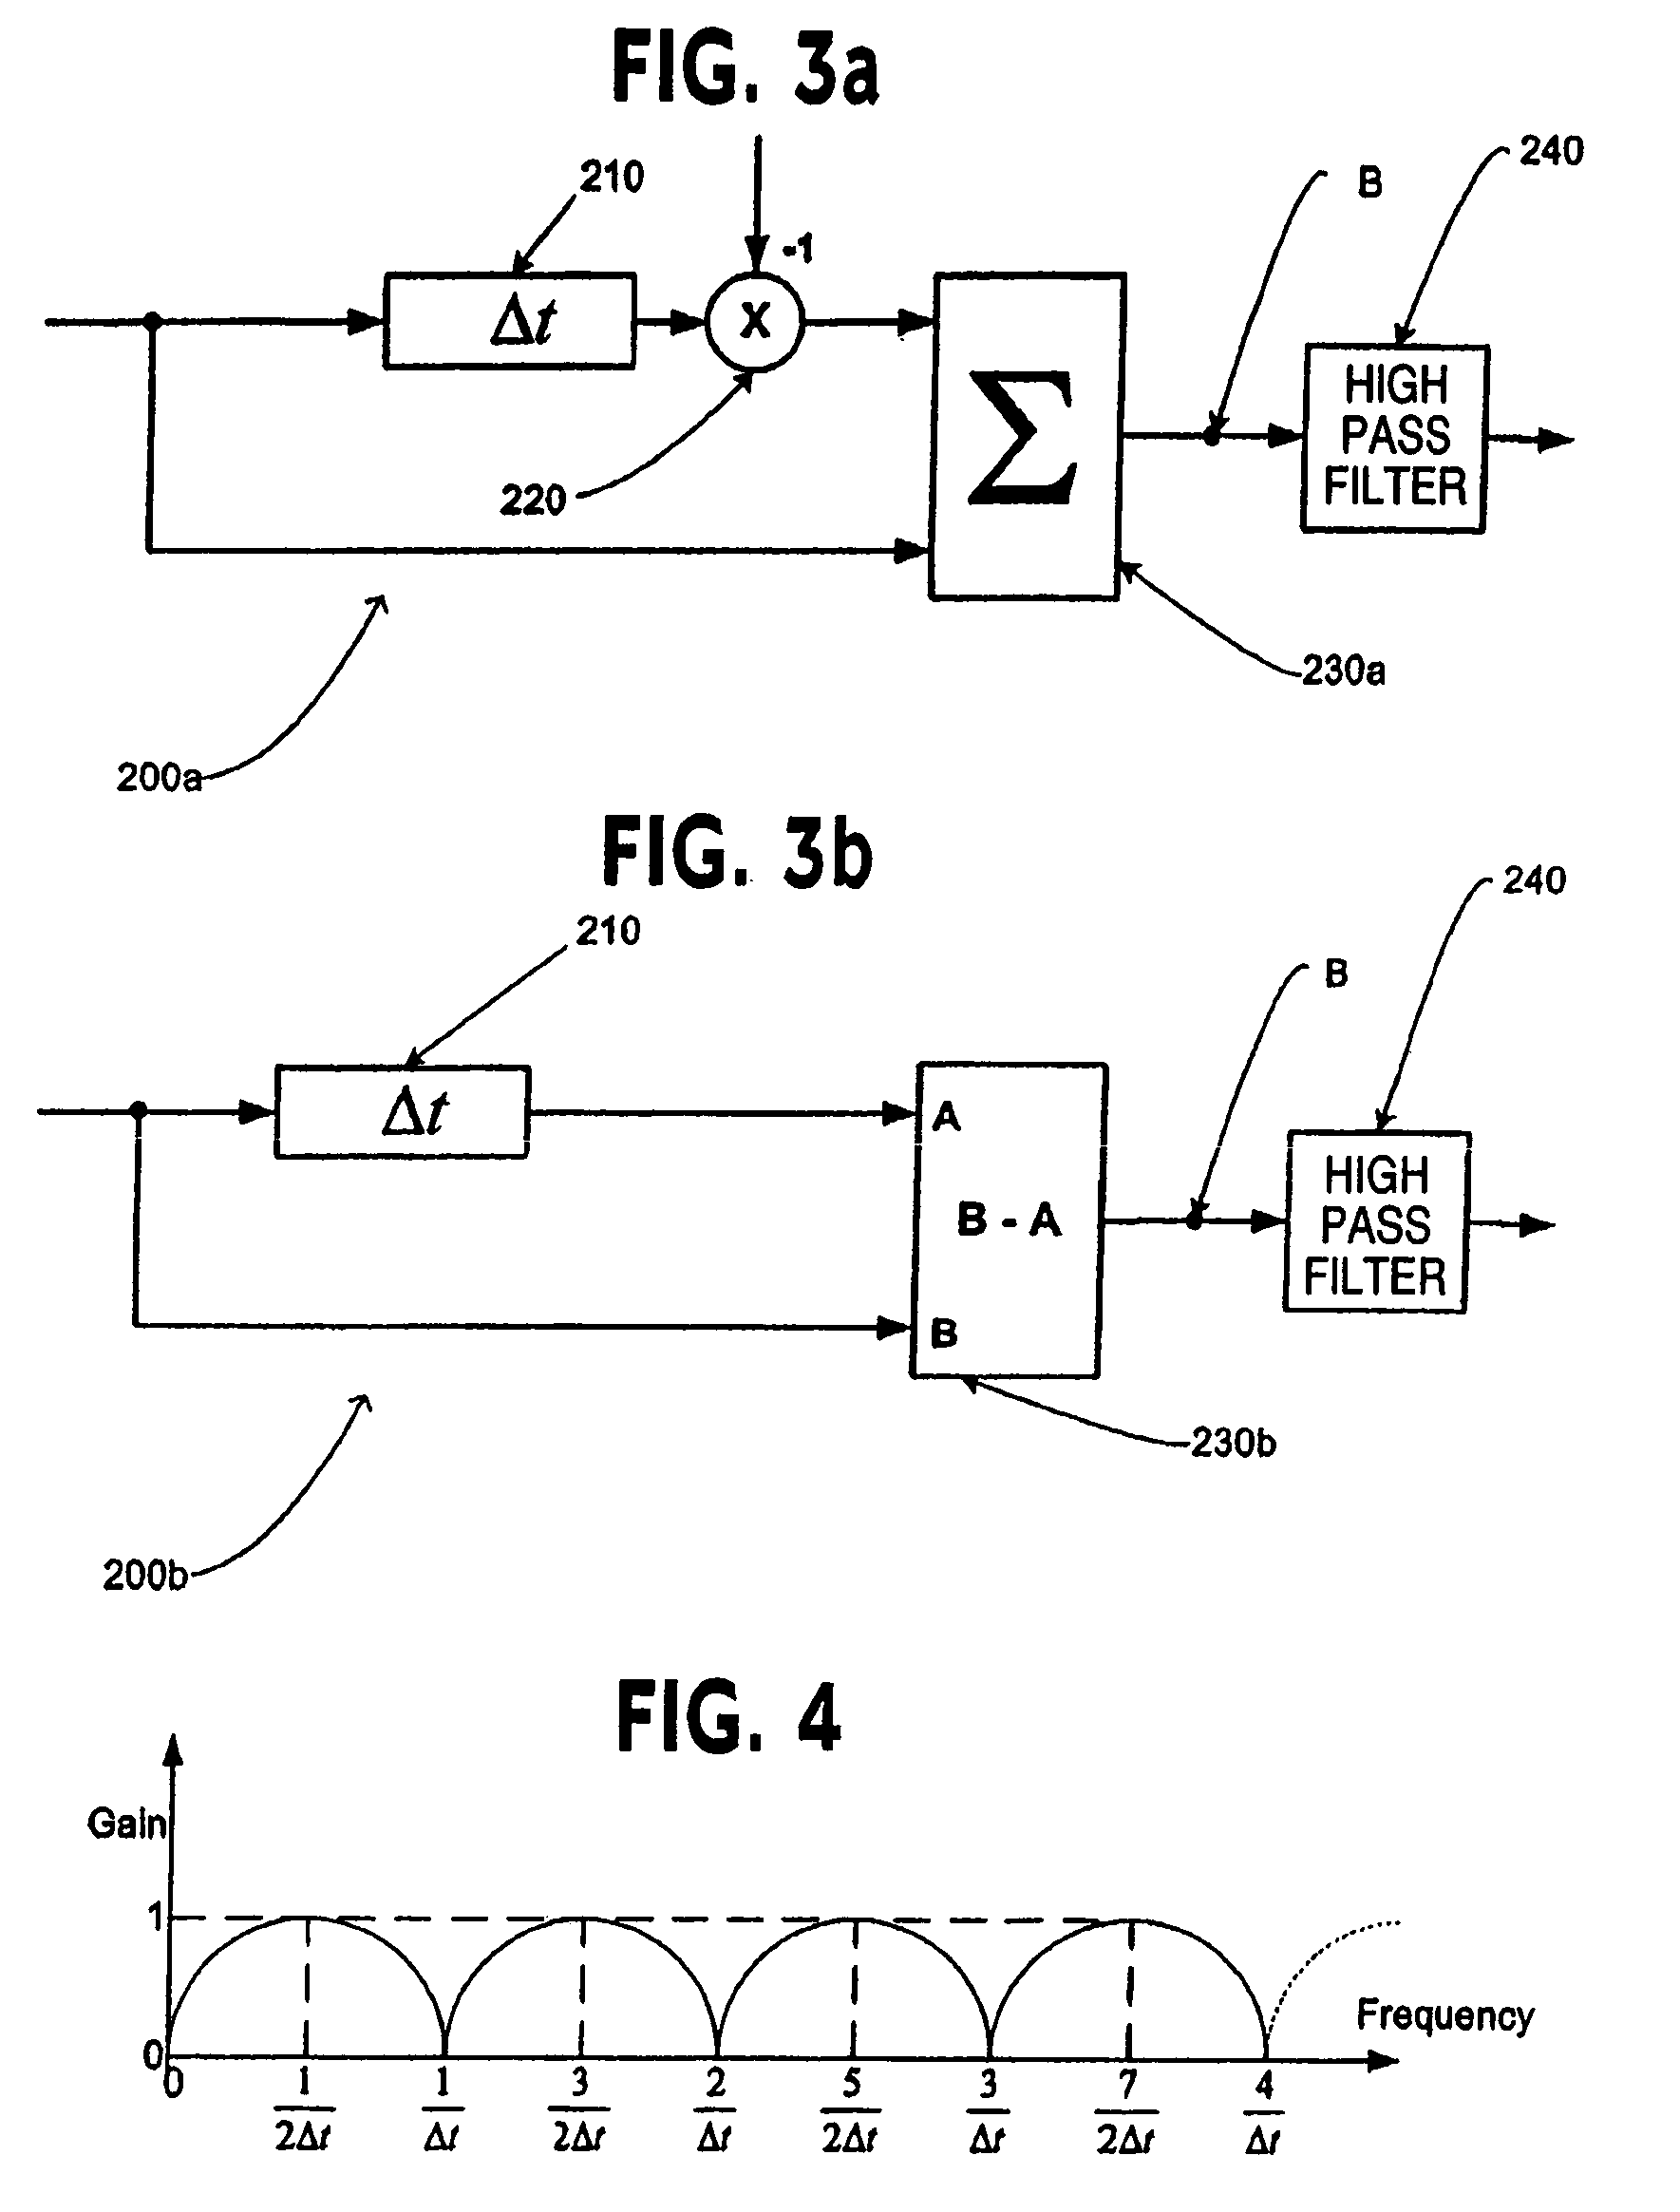 Cable detection apparatus and method